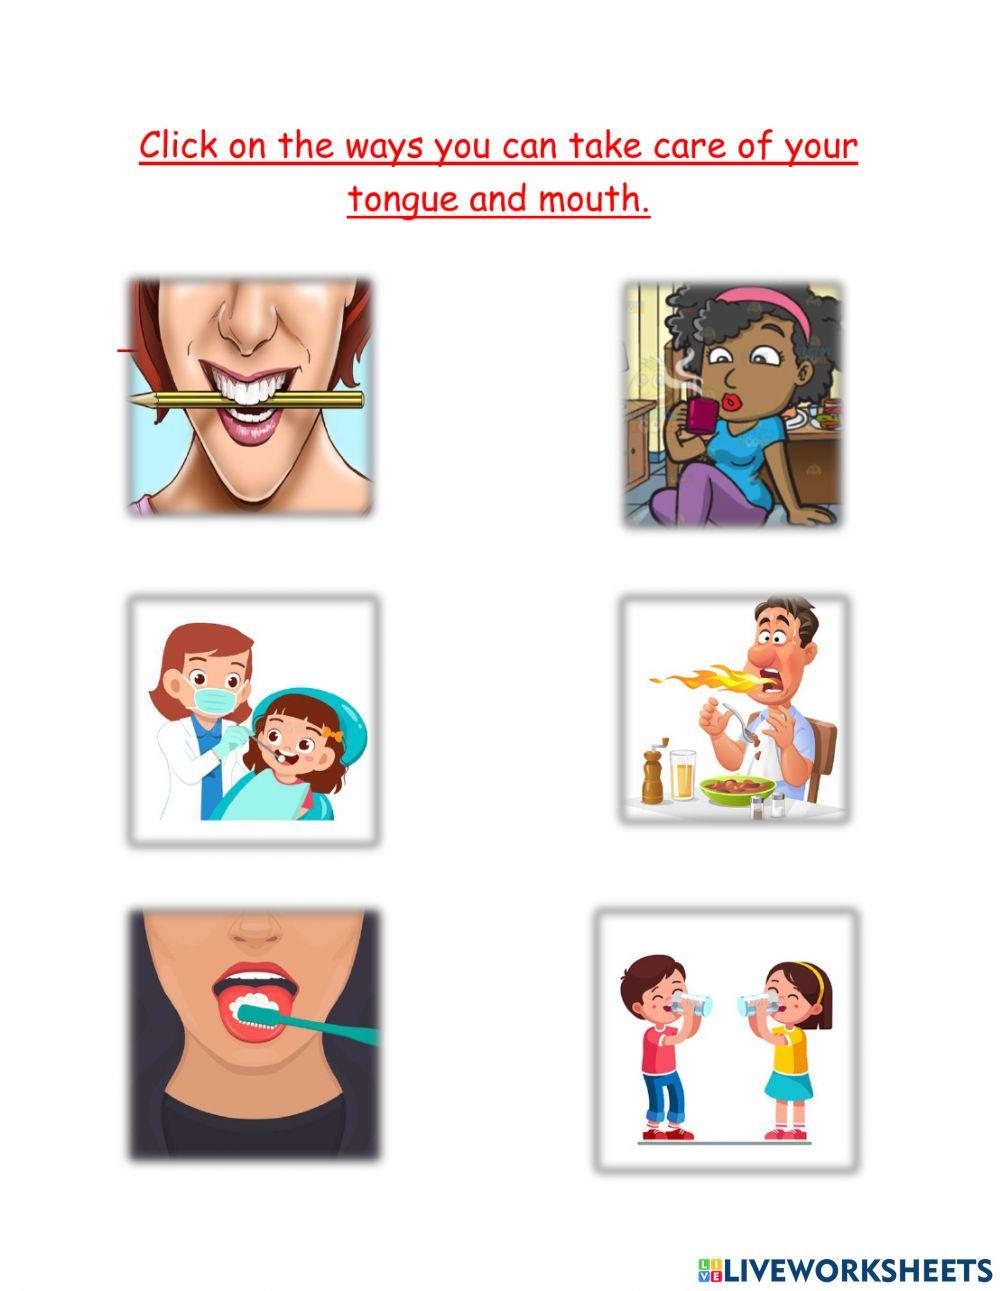 Caring for Your Tongue